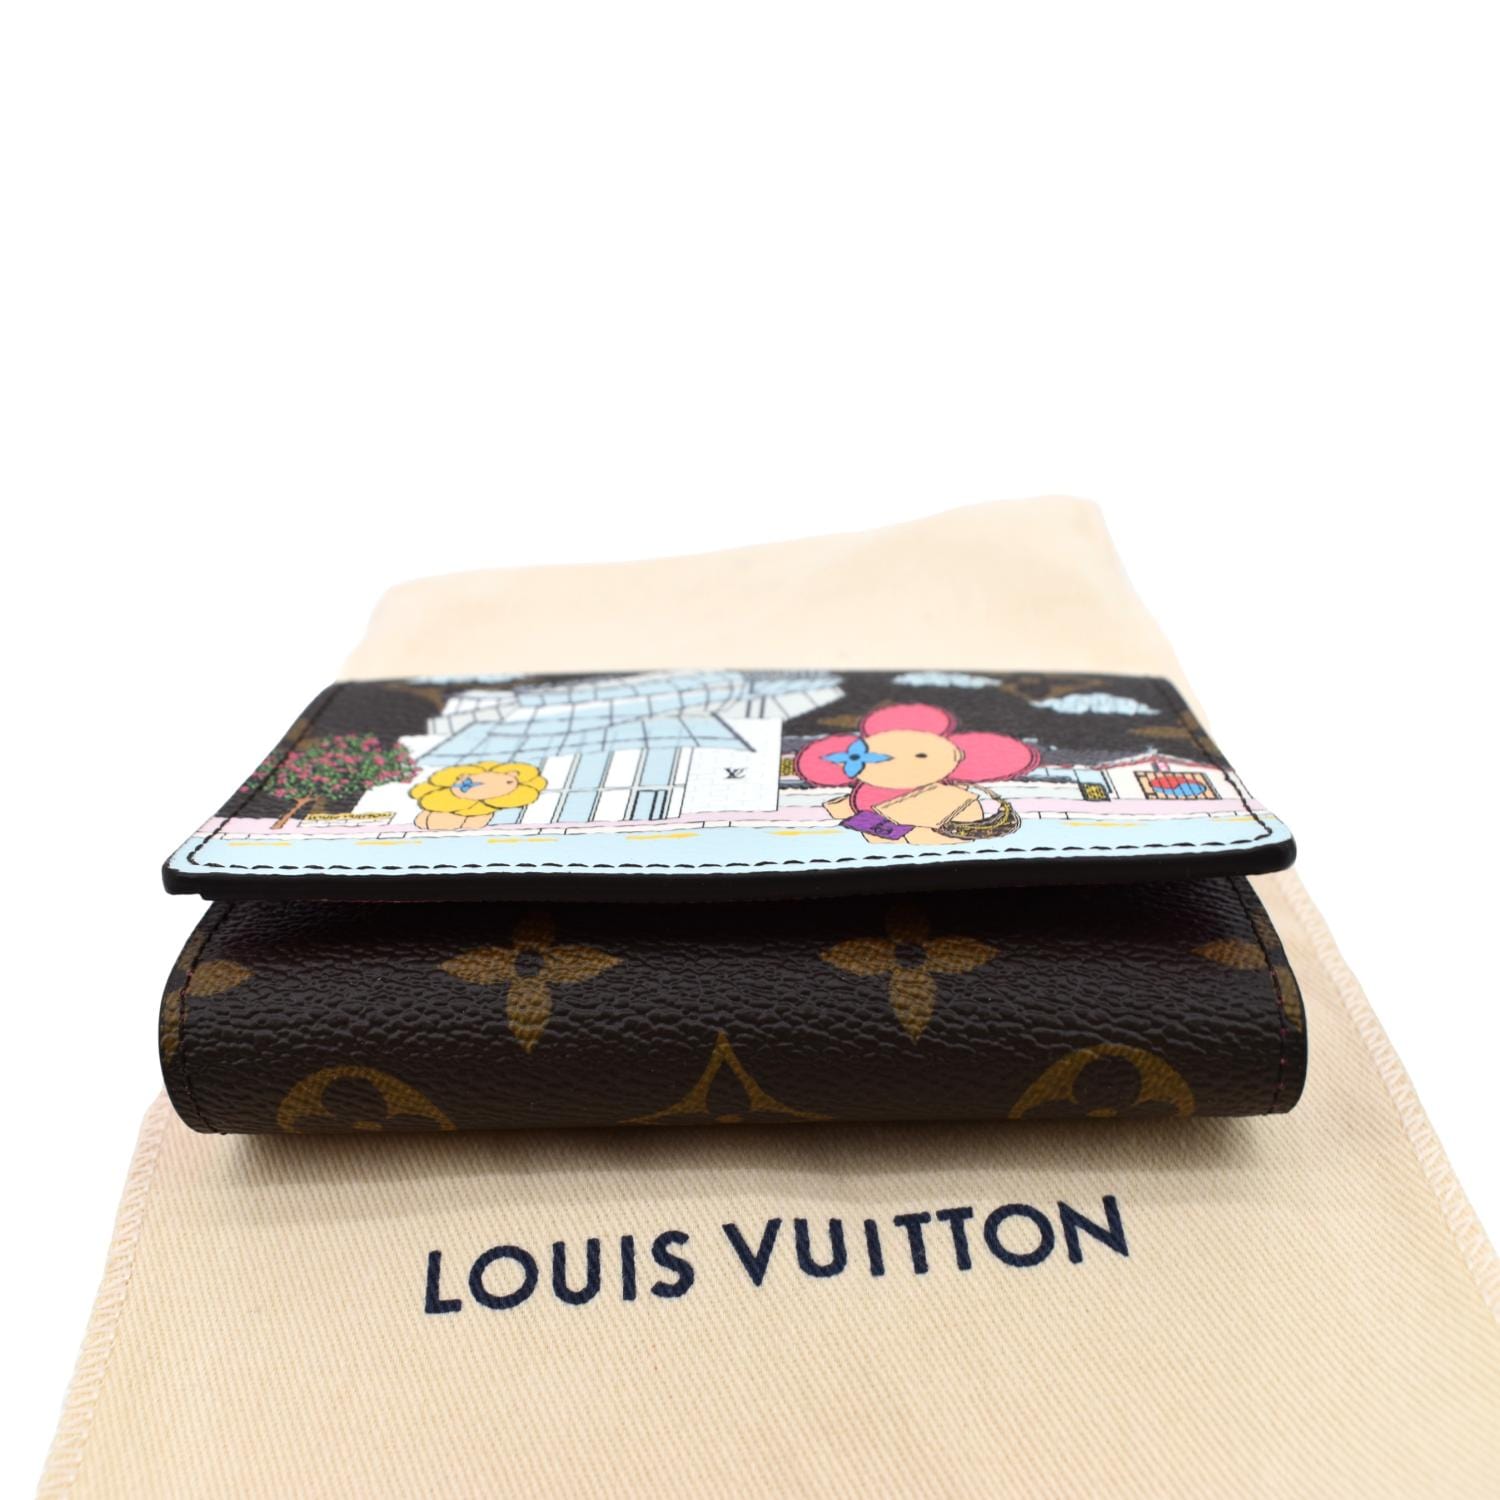 louie vuitton small wallet for women clearance outlet multicolour